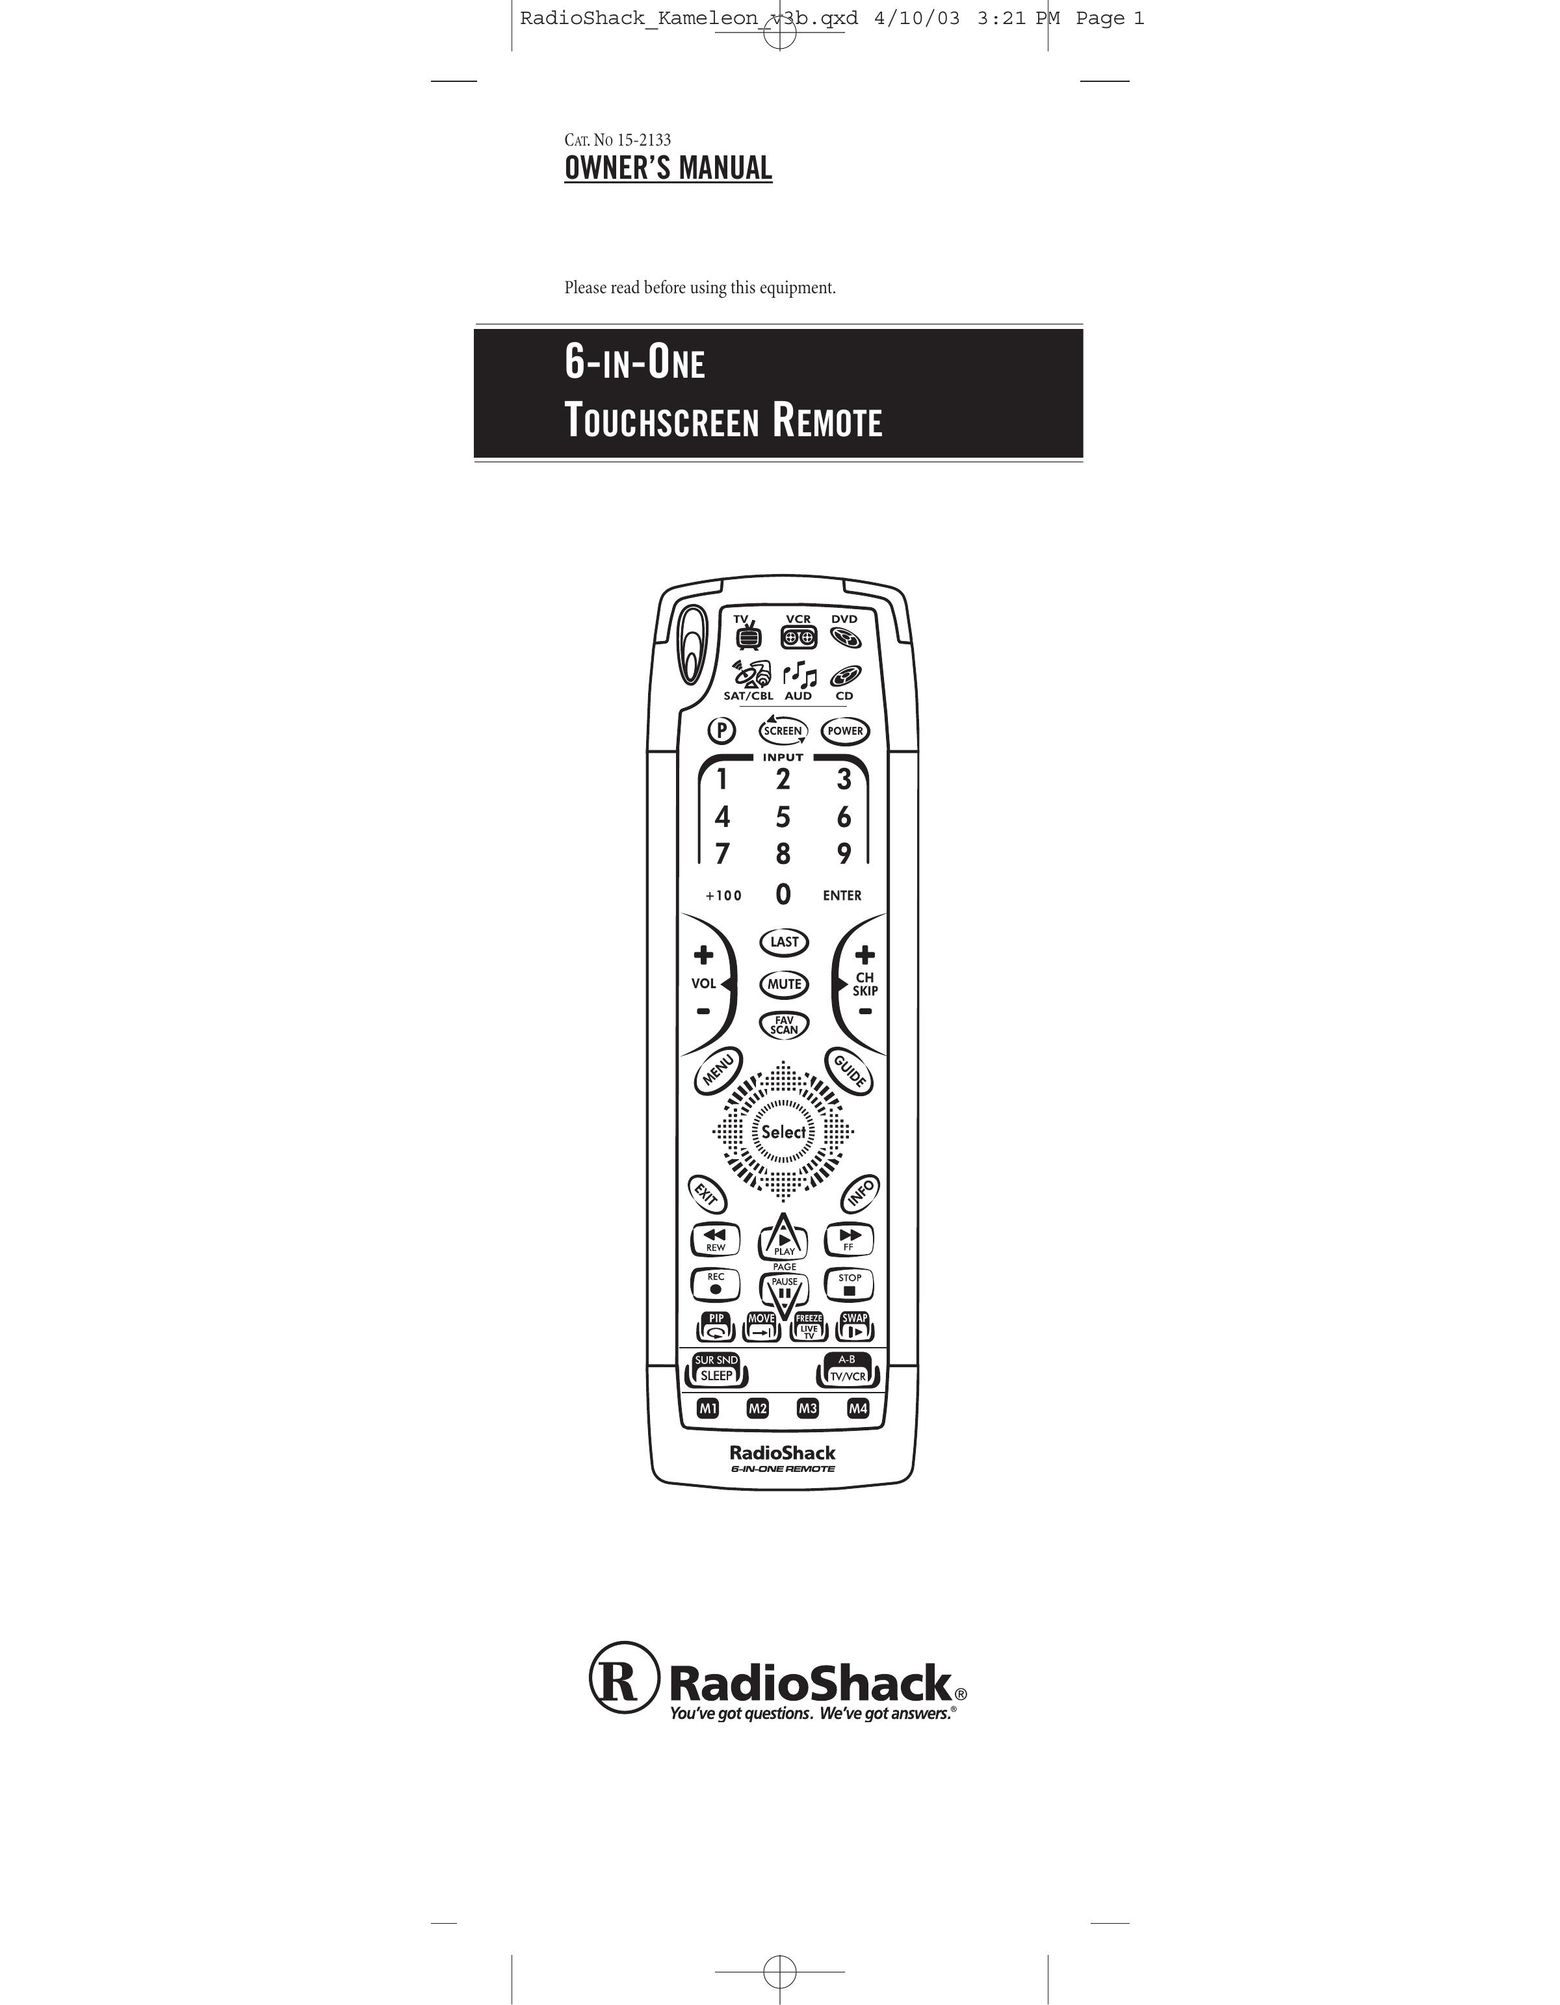 Radio Shack 6-IN-ONE TOUCHSCREEN REMOTE Universal Remote User Manual